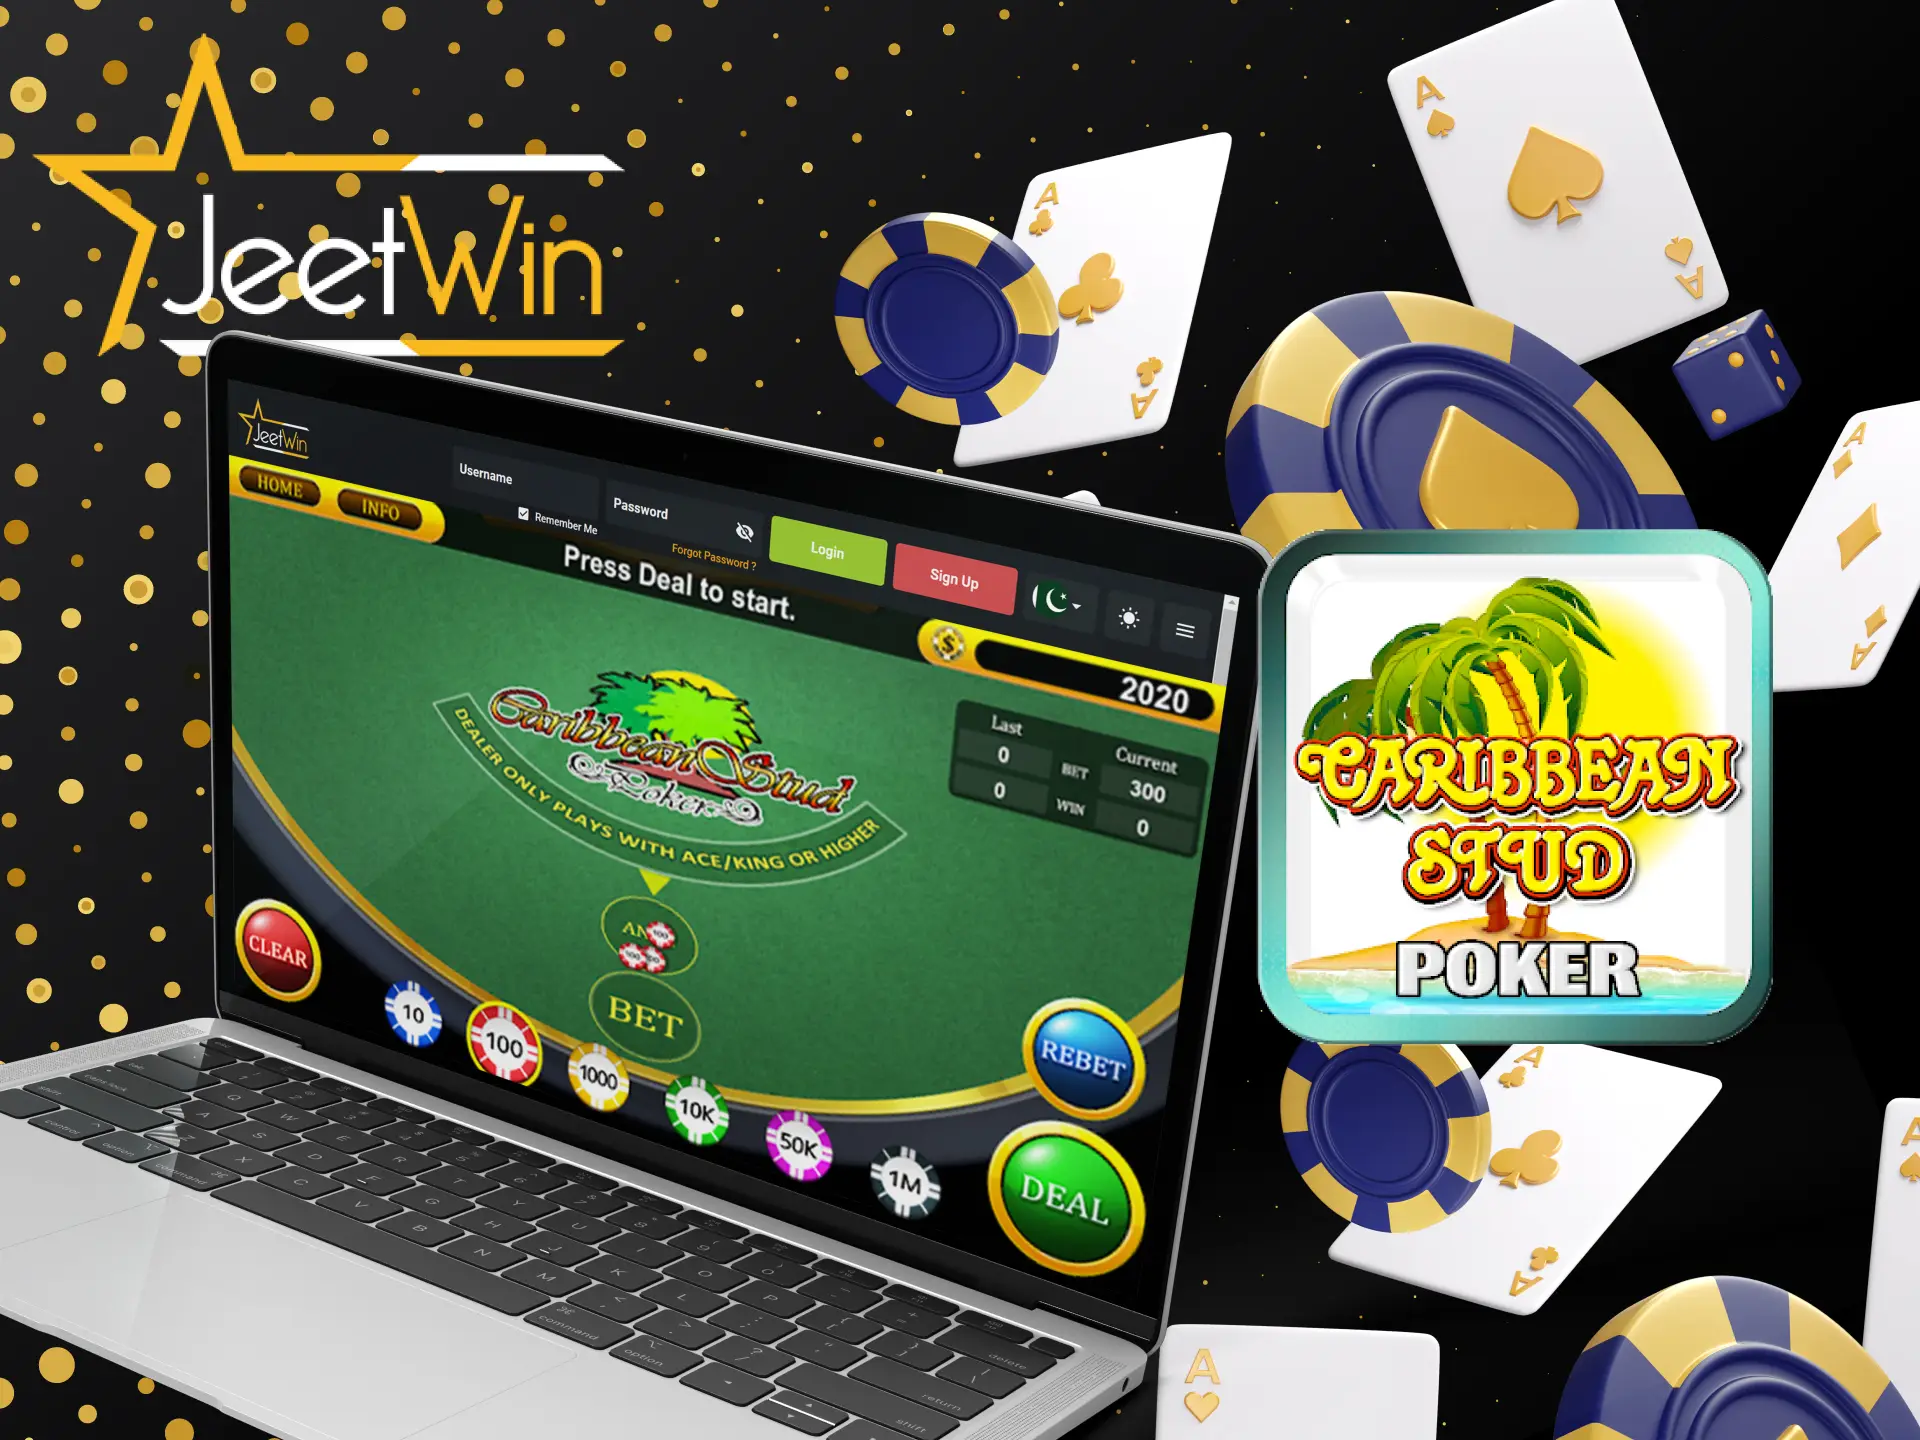 Have a great time with Caribbean Stud Poker at JeetWin.